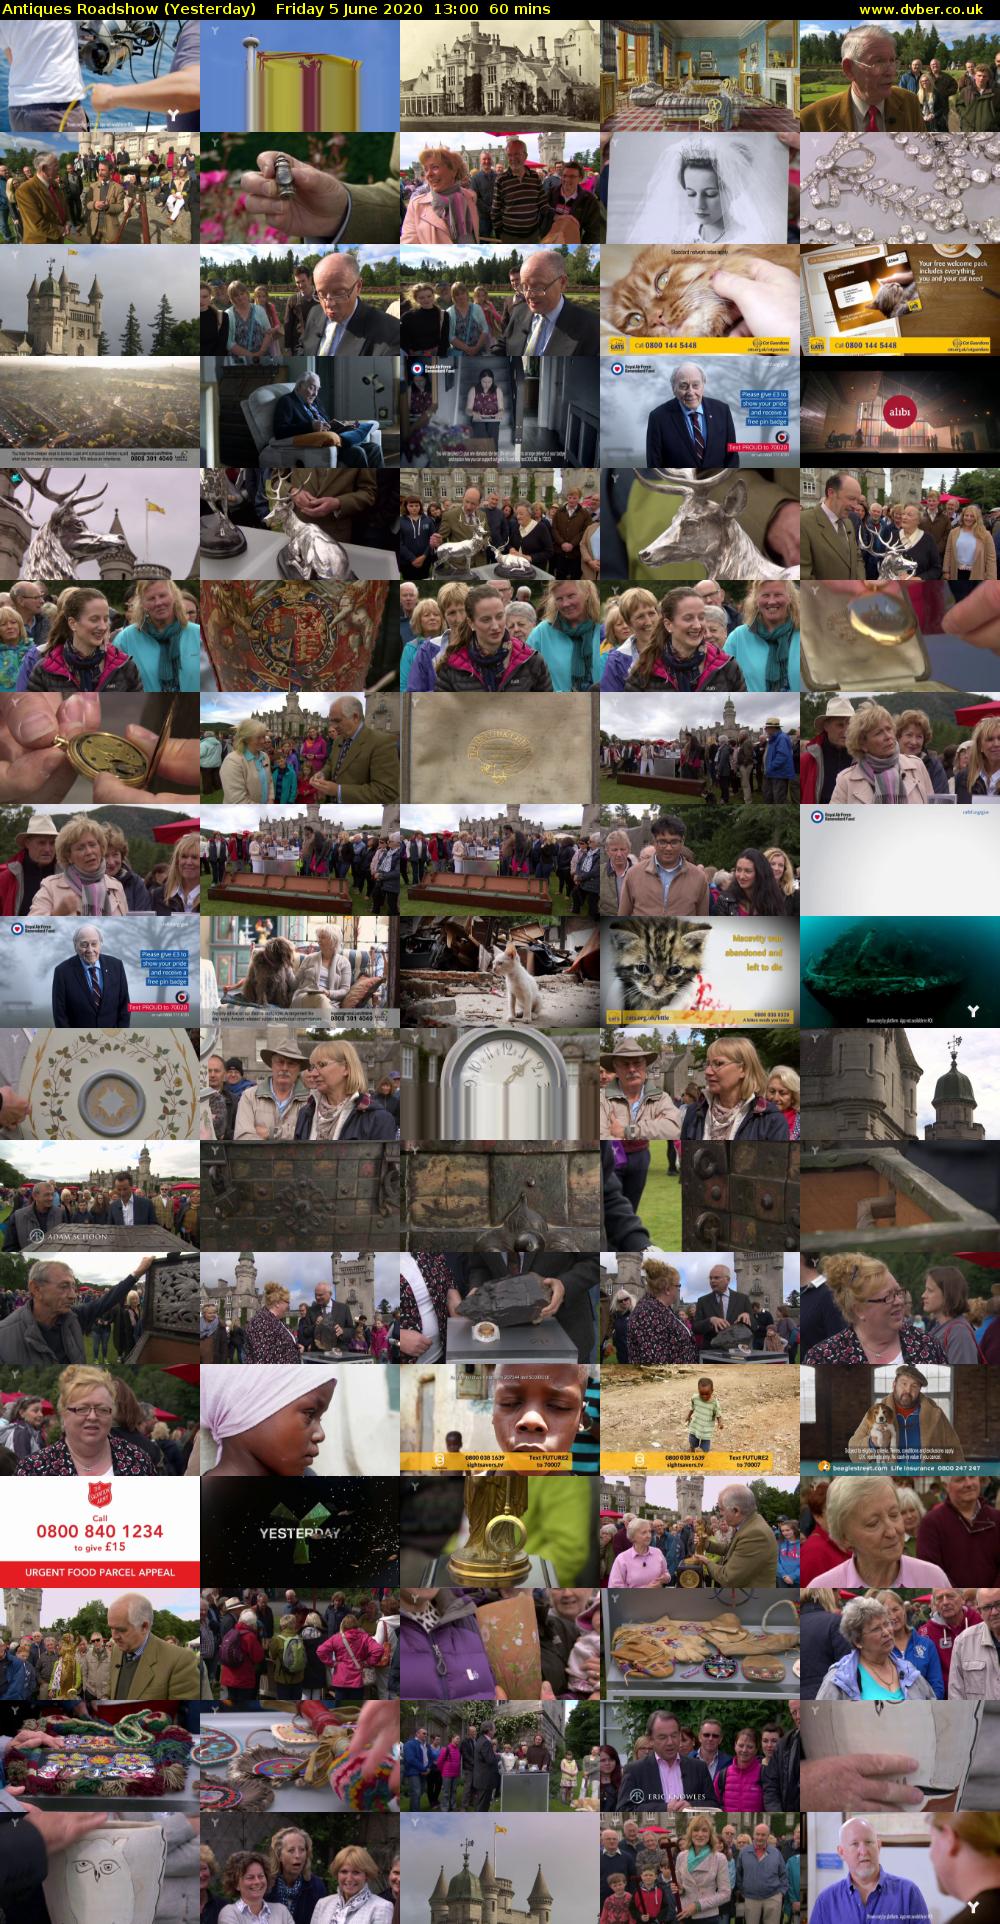 Antiques Roadshow (Yesterday) Friday 5 June 2020 13:00 - 14:00